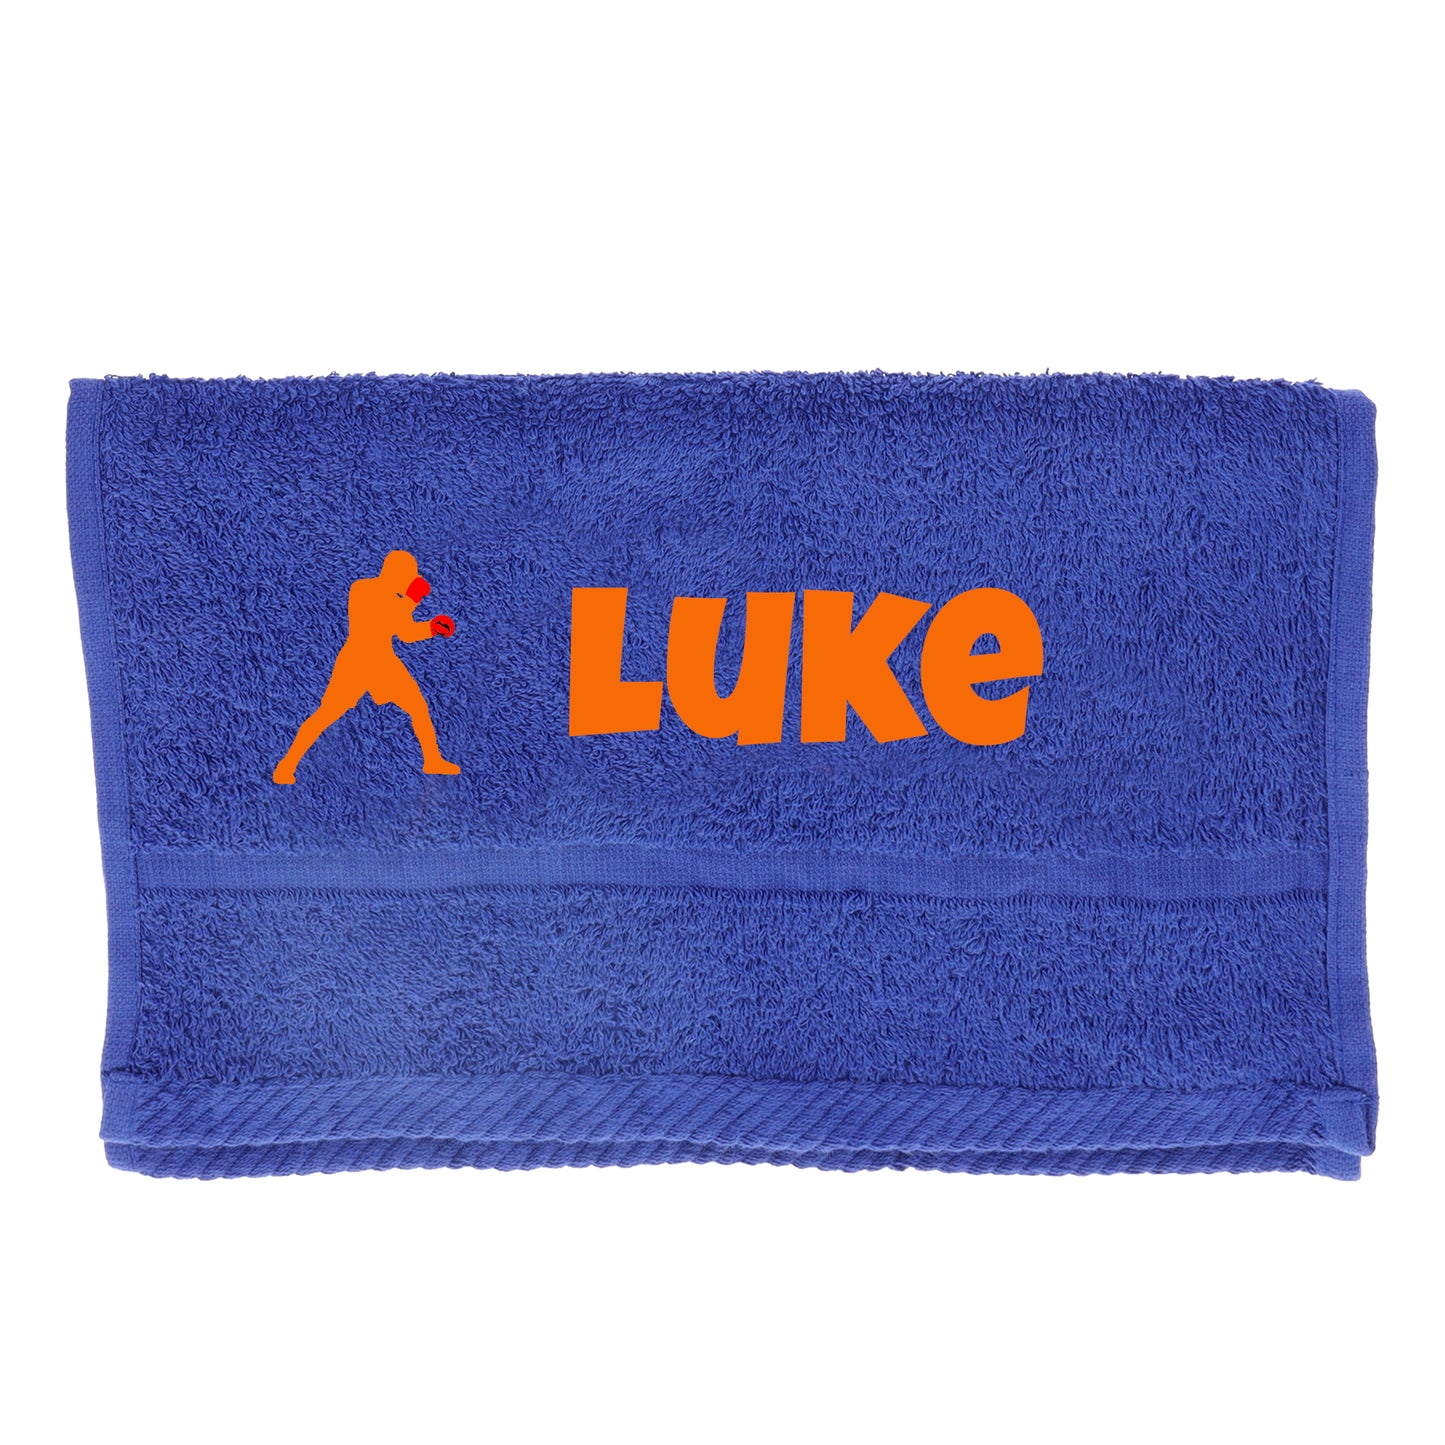 Personalised Embroidered Boxing Towel  - Always Looking Good - Royal Blue  